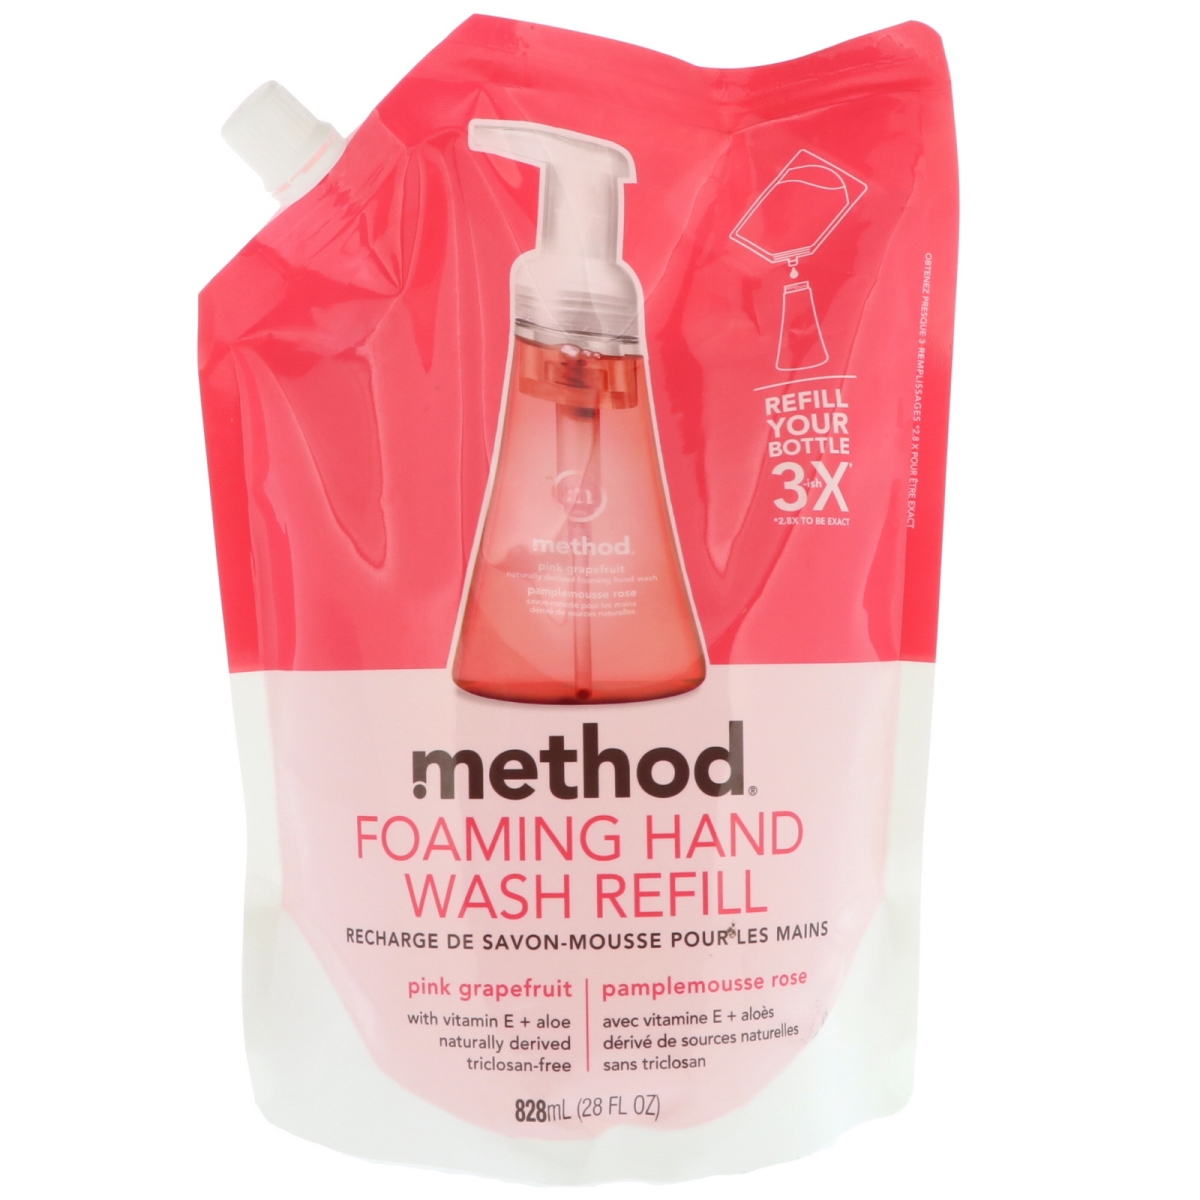 01688 Ref Foaming Refill Hand Wash, Pink Grapefruit - Pack Of 6